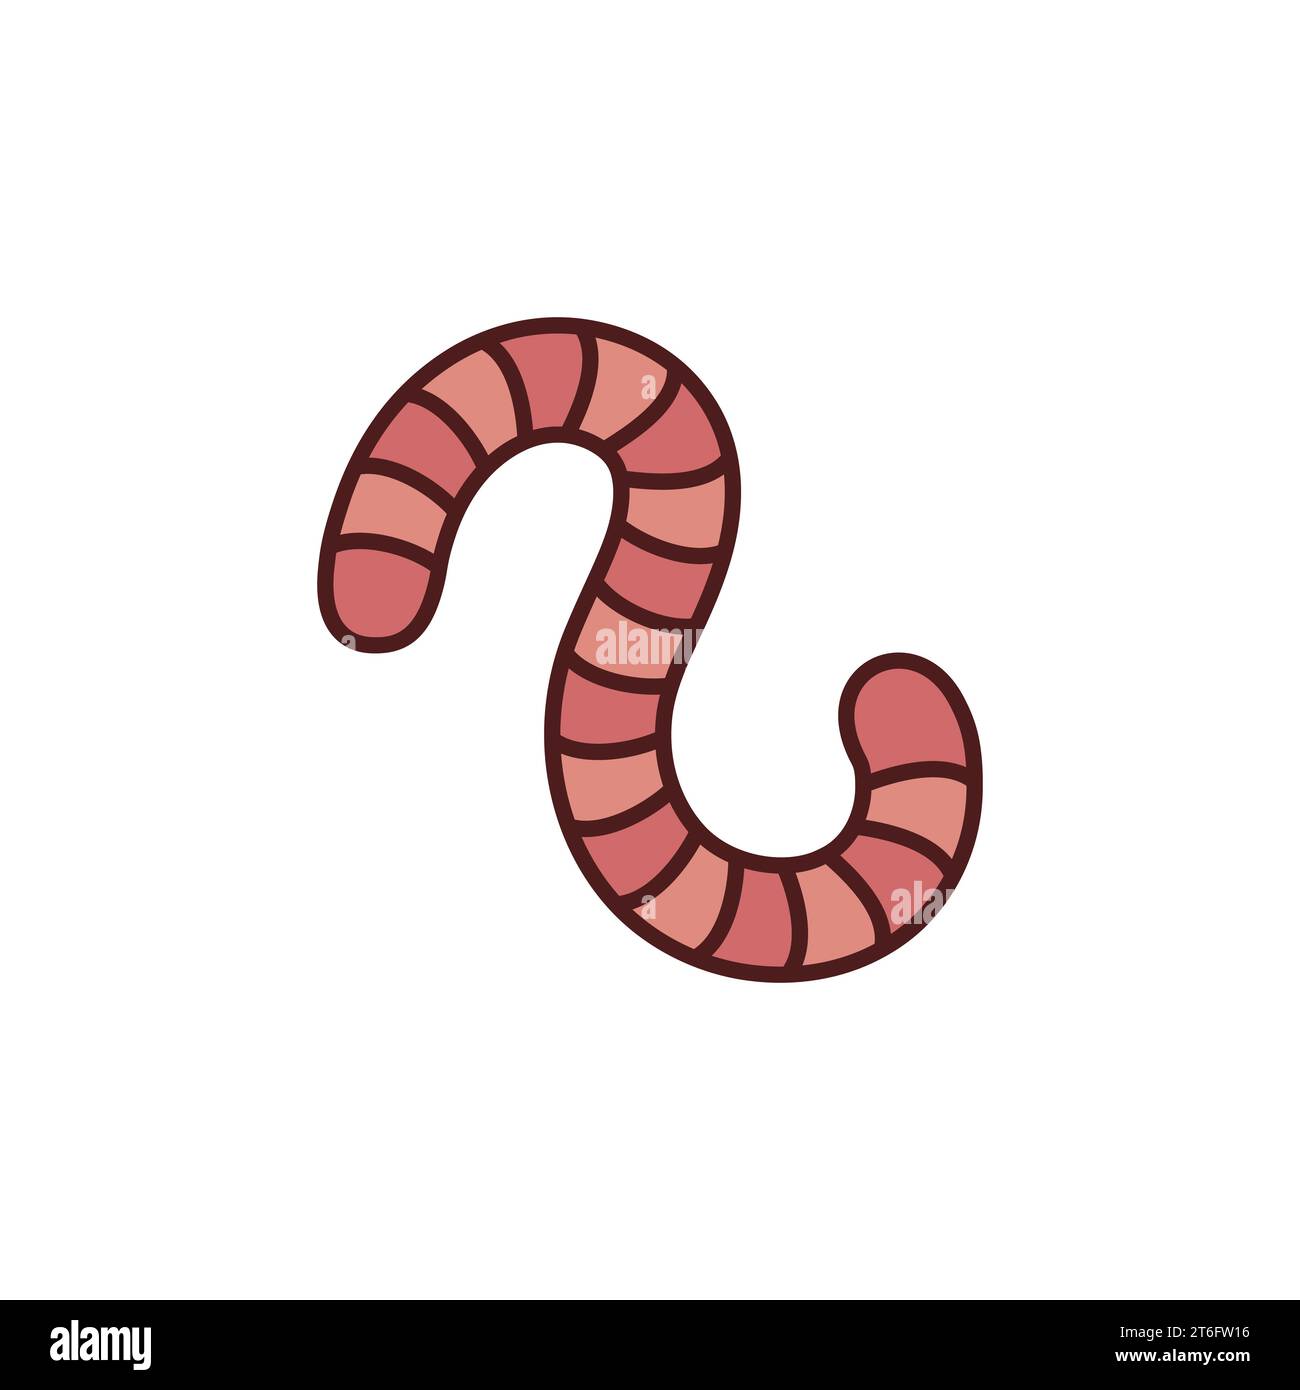 https://c8.alamy.com/comp/2T6FW16/worm-vector-concept-colored-modern-icon-or-design-element-2T6FW16.jpg